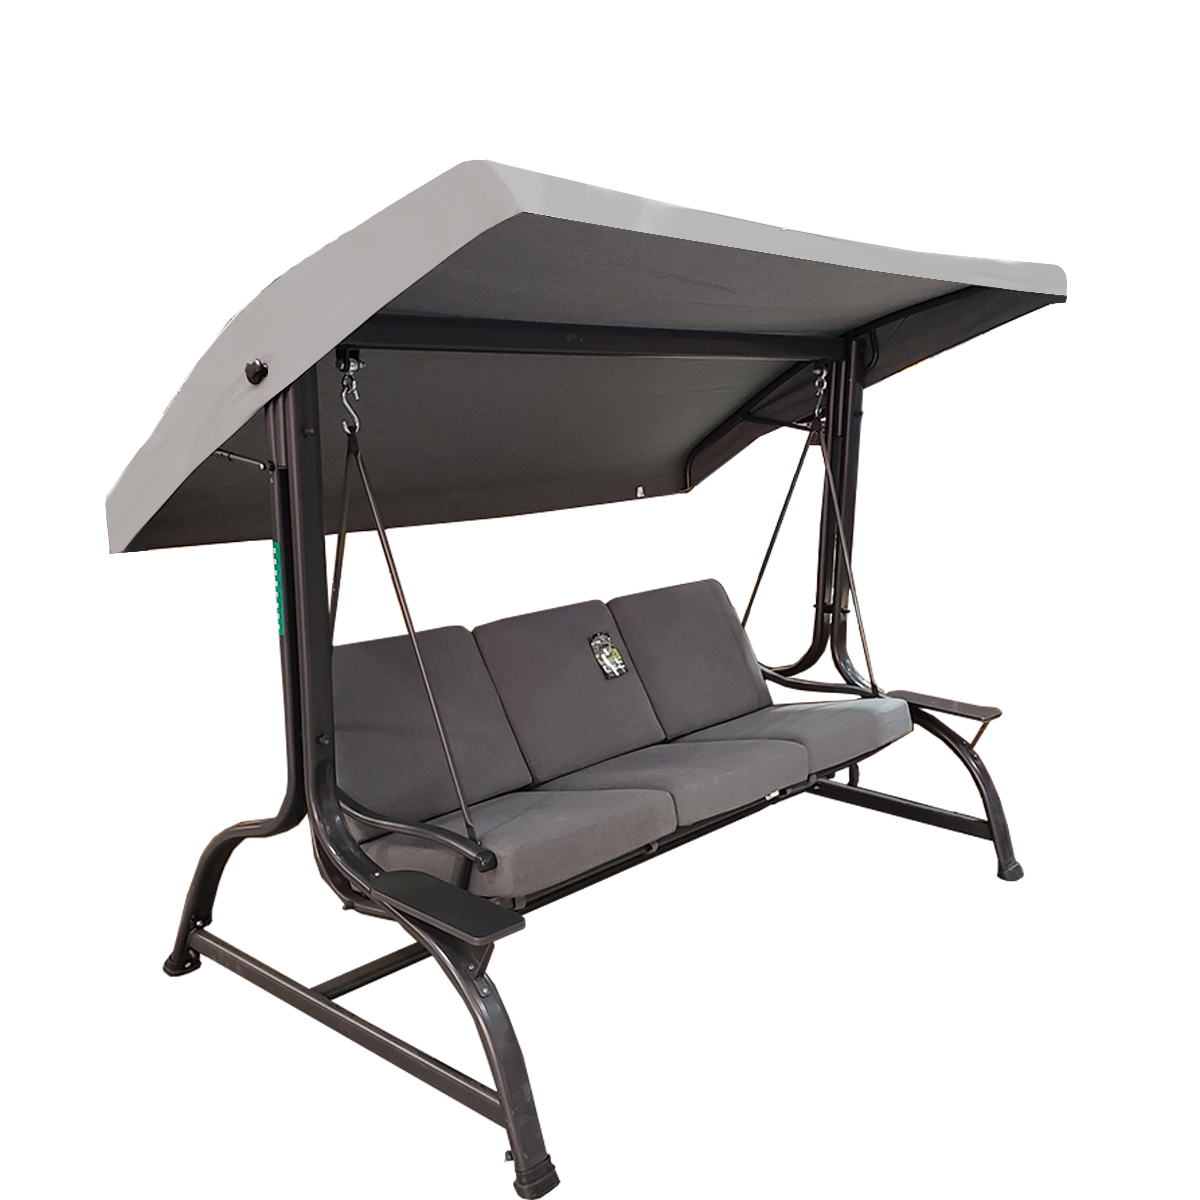 Replacement Canopy for 1902463 Swing - RipLock 350 - Slate Gray